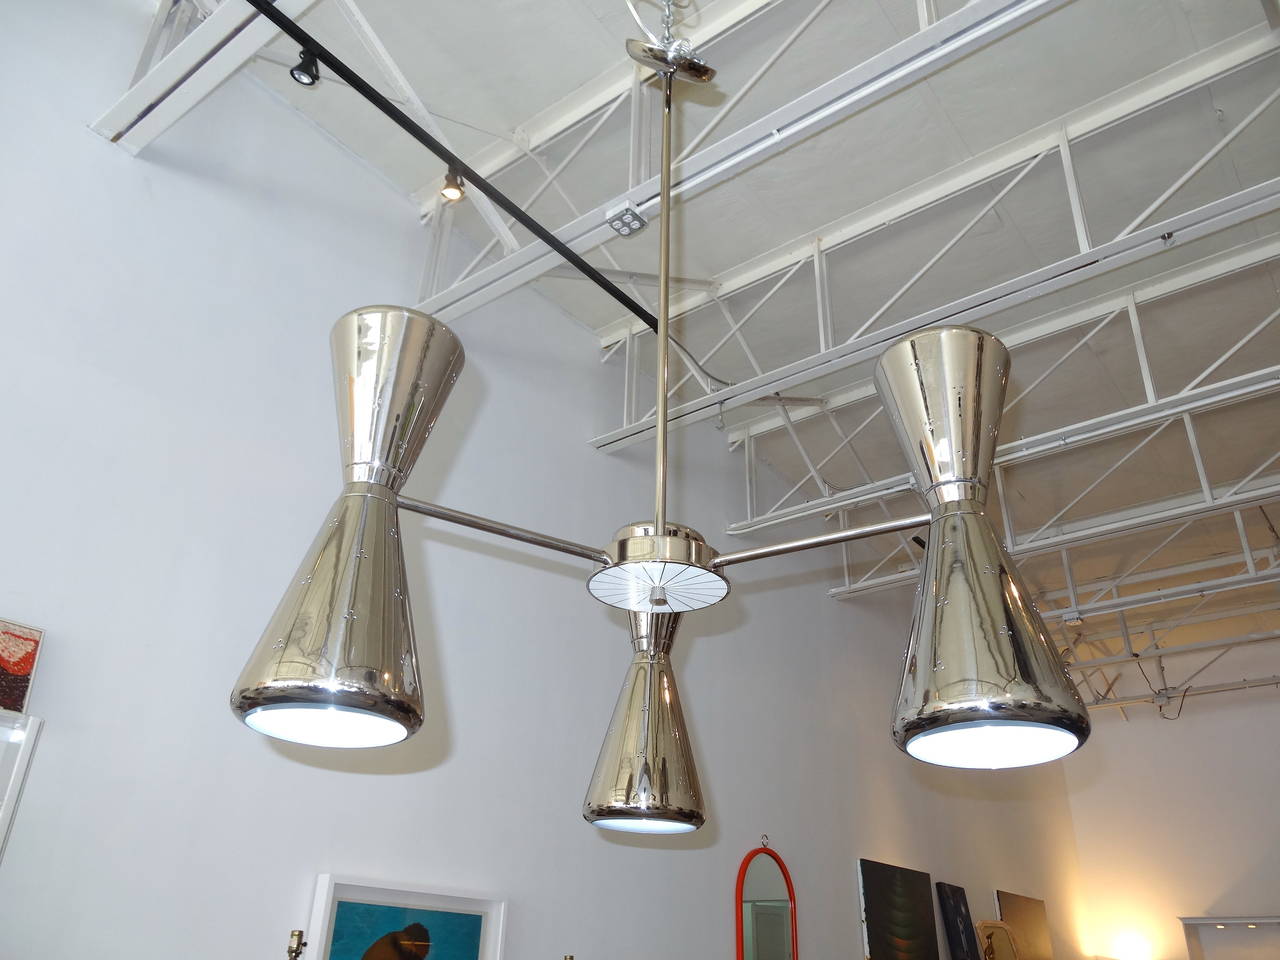 Nickel-plated Lightolier chandelier from 1950s. With the pole height 40